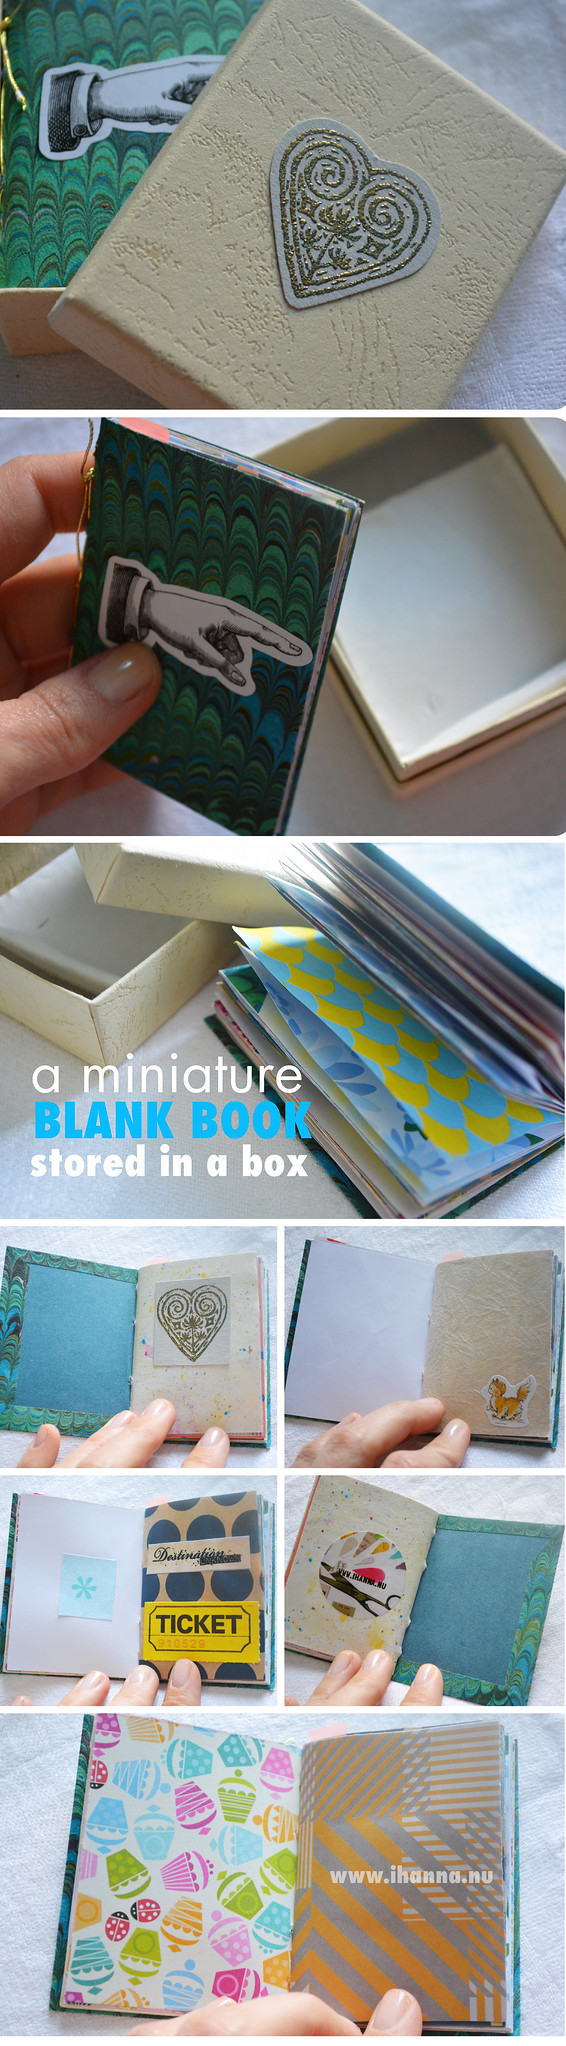 A miniature notebook by iHanna - Copyright Hanna Andersson